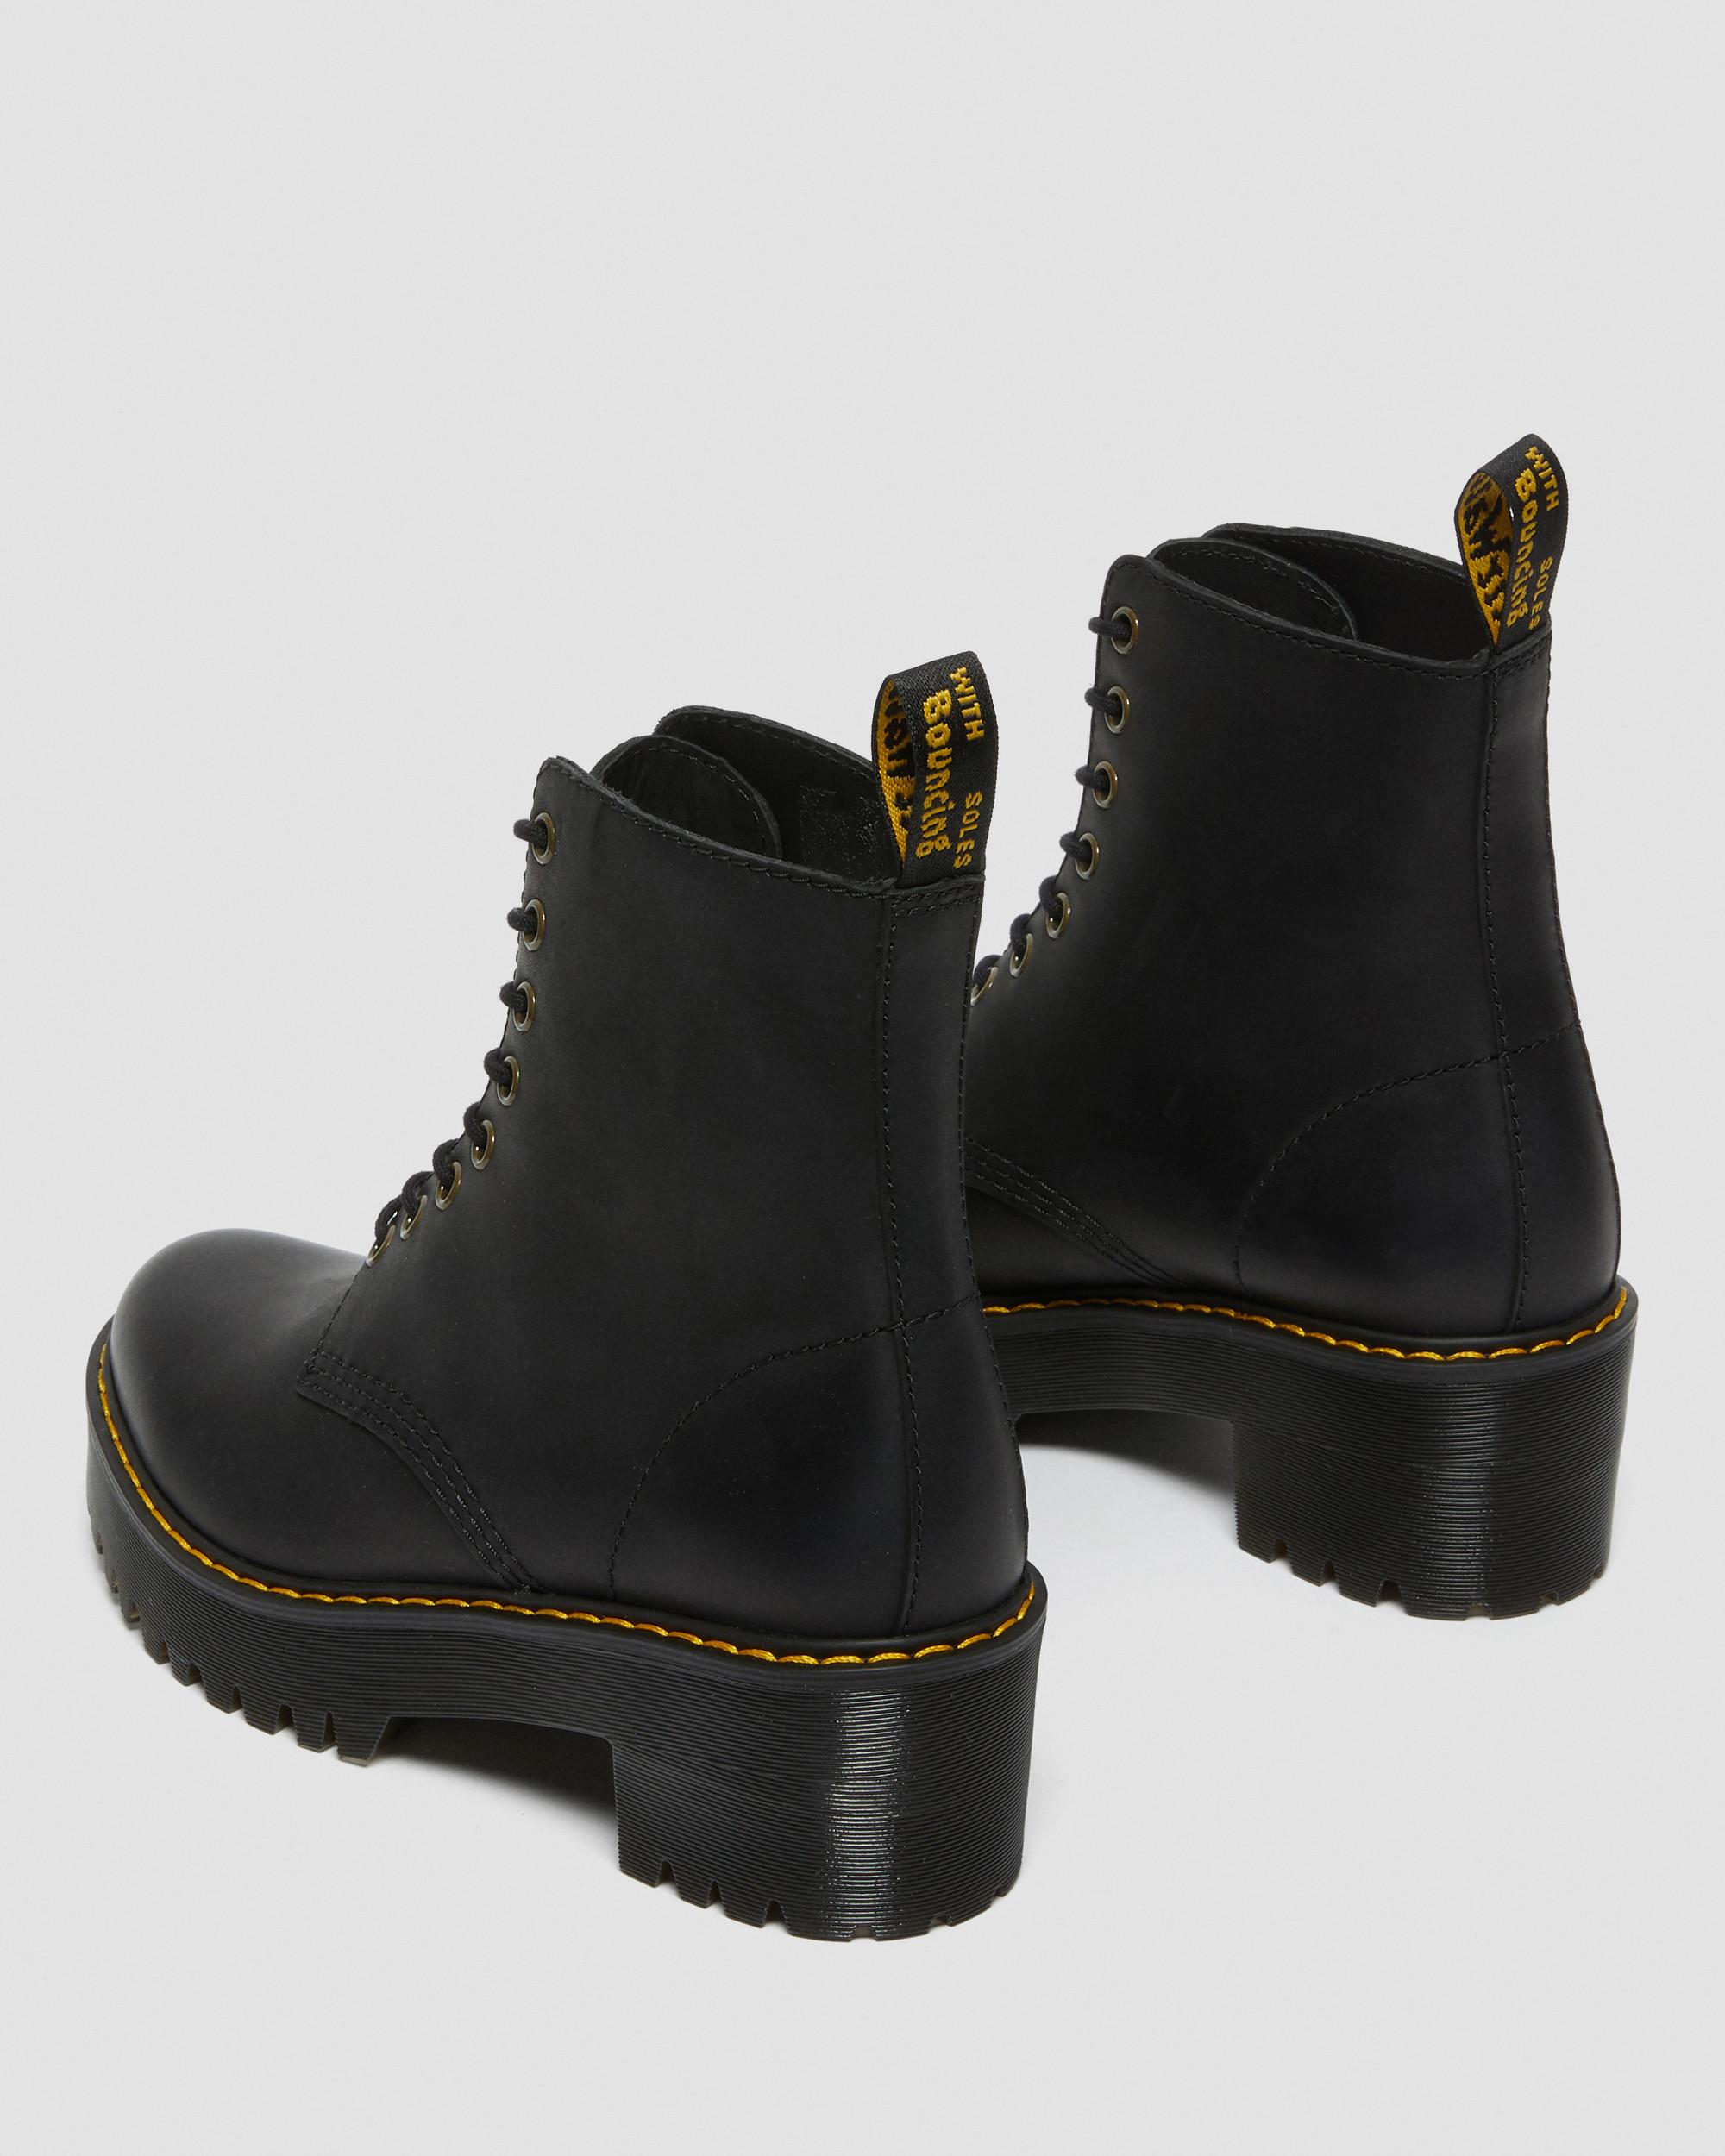 doc martens with a heel